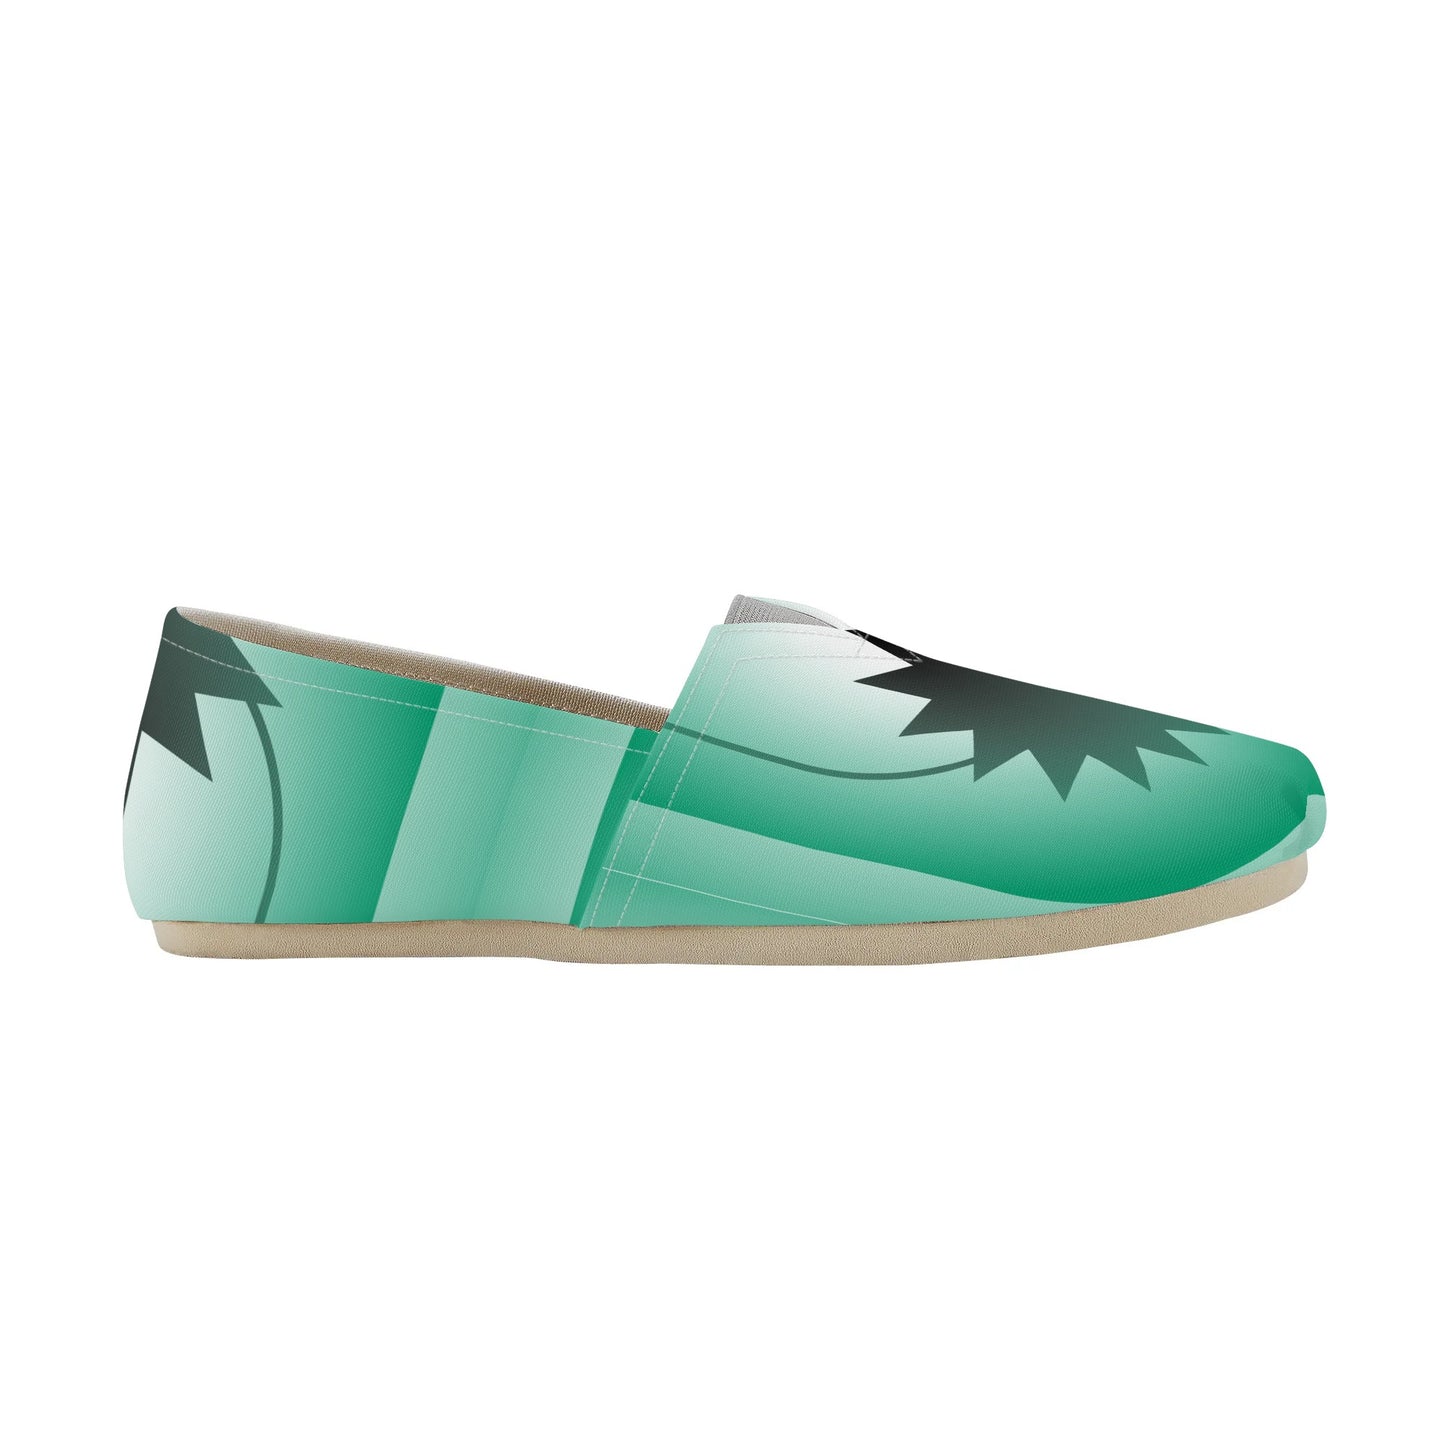 Green Ethereal Orb Geometric Abstract Star Womens Casual Slip On Shoes